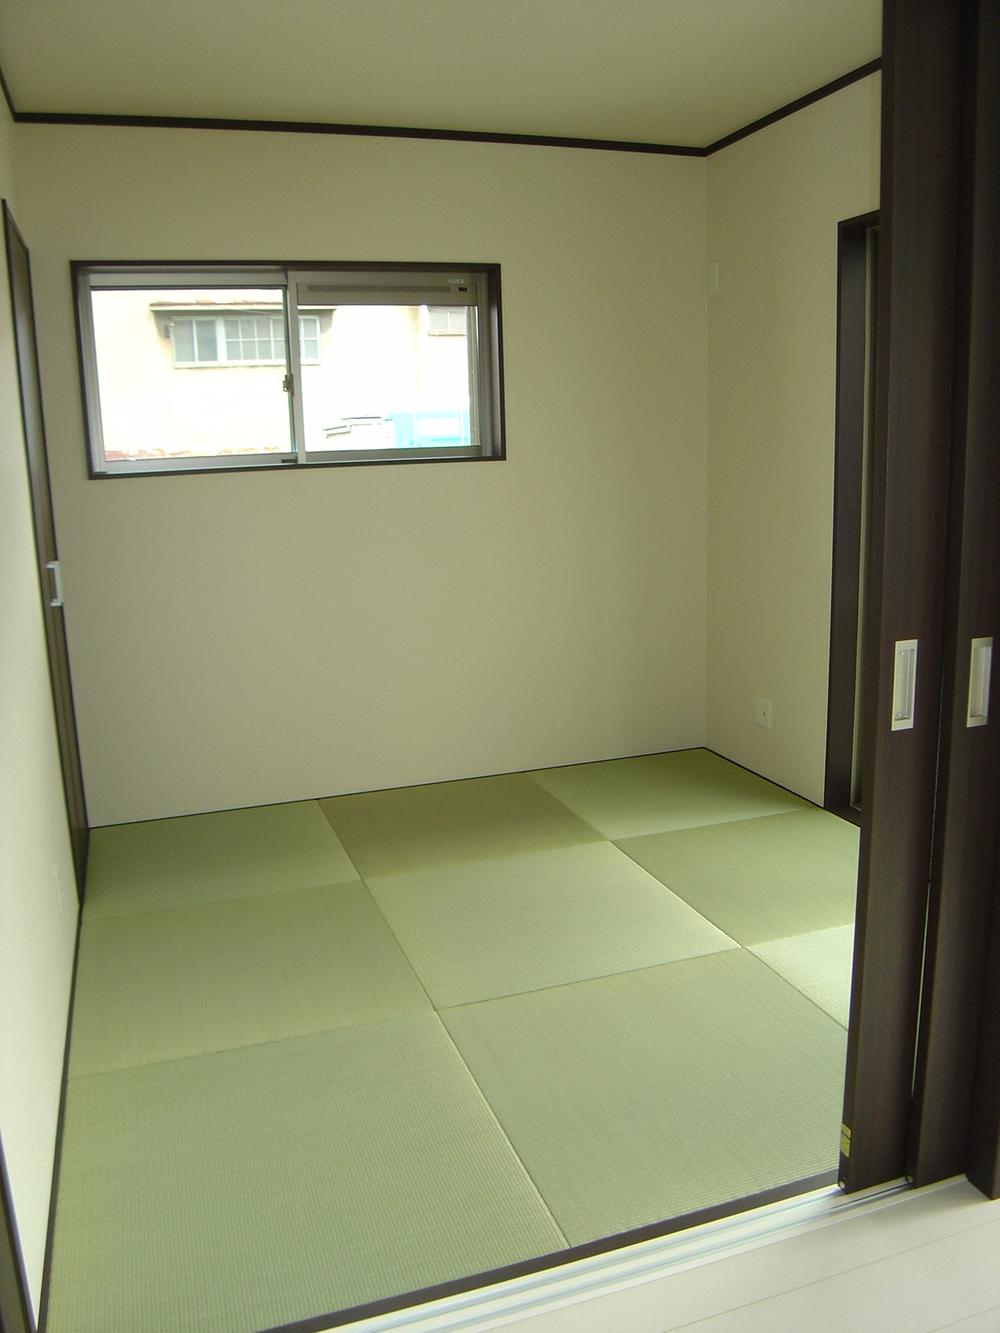 Non-living room. Our same specification example of construction (Japanese-style)